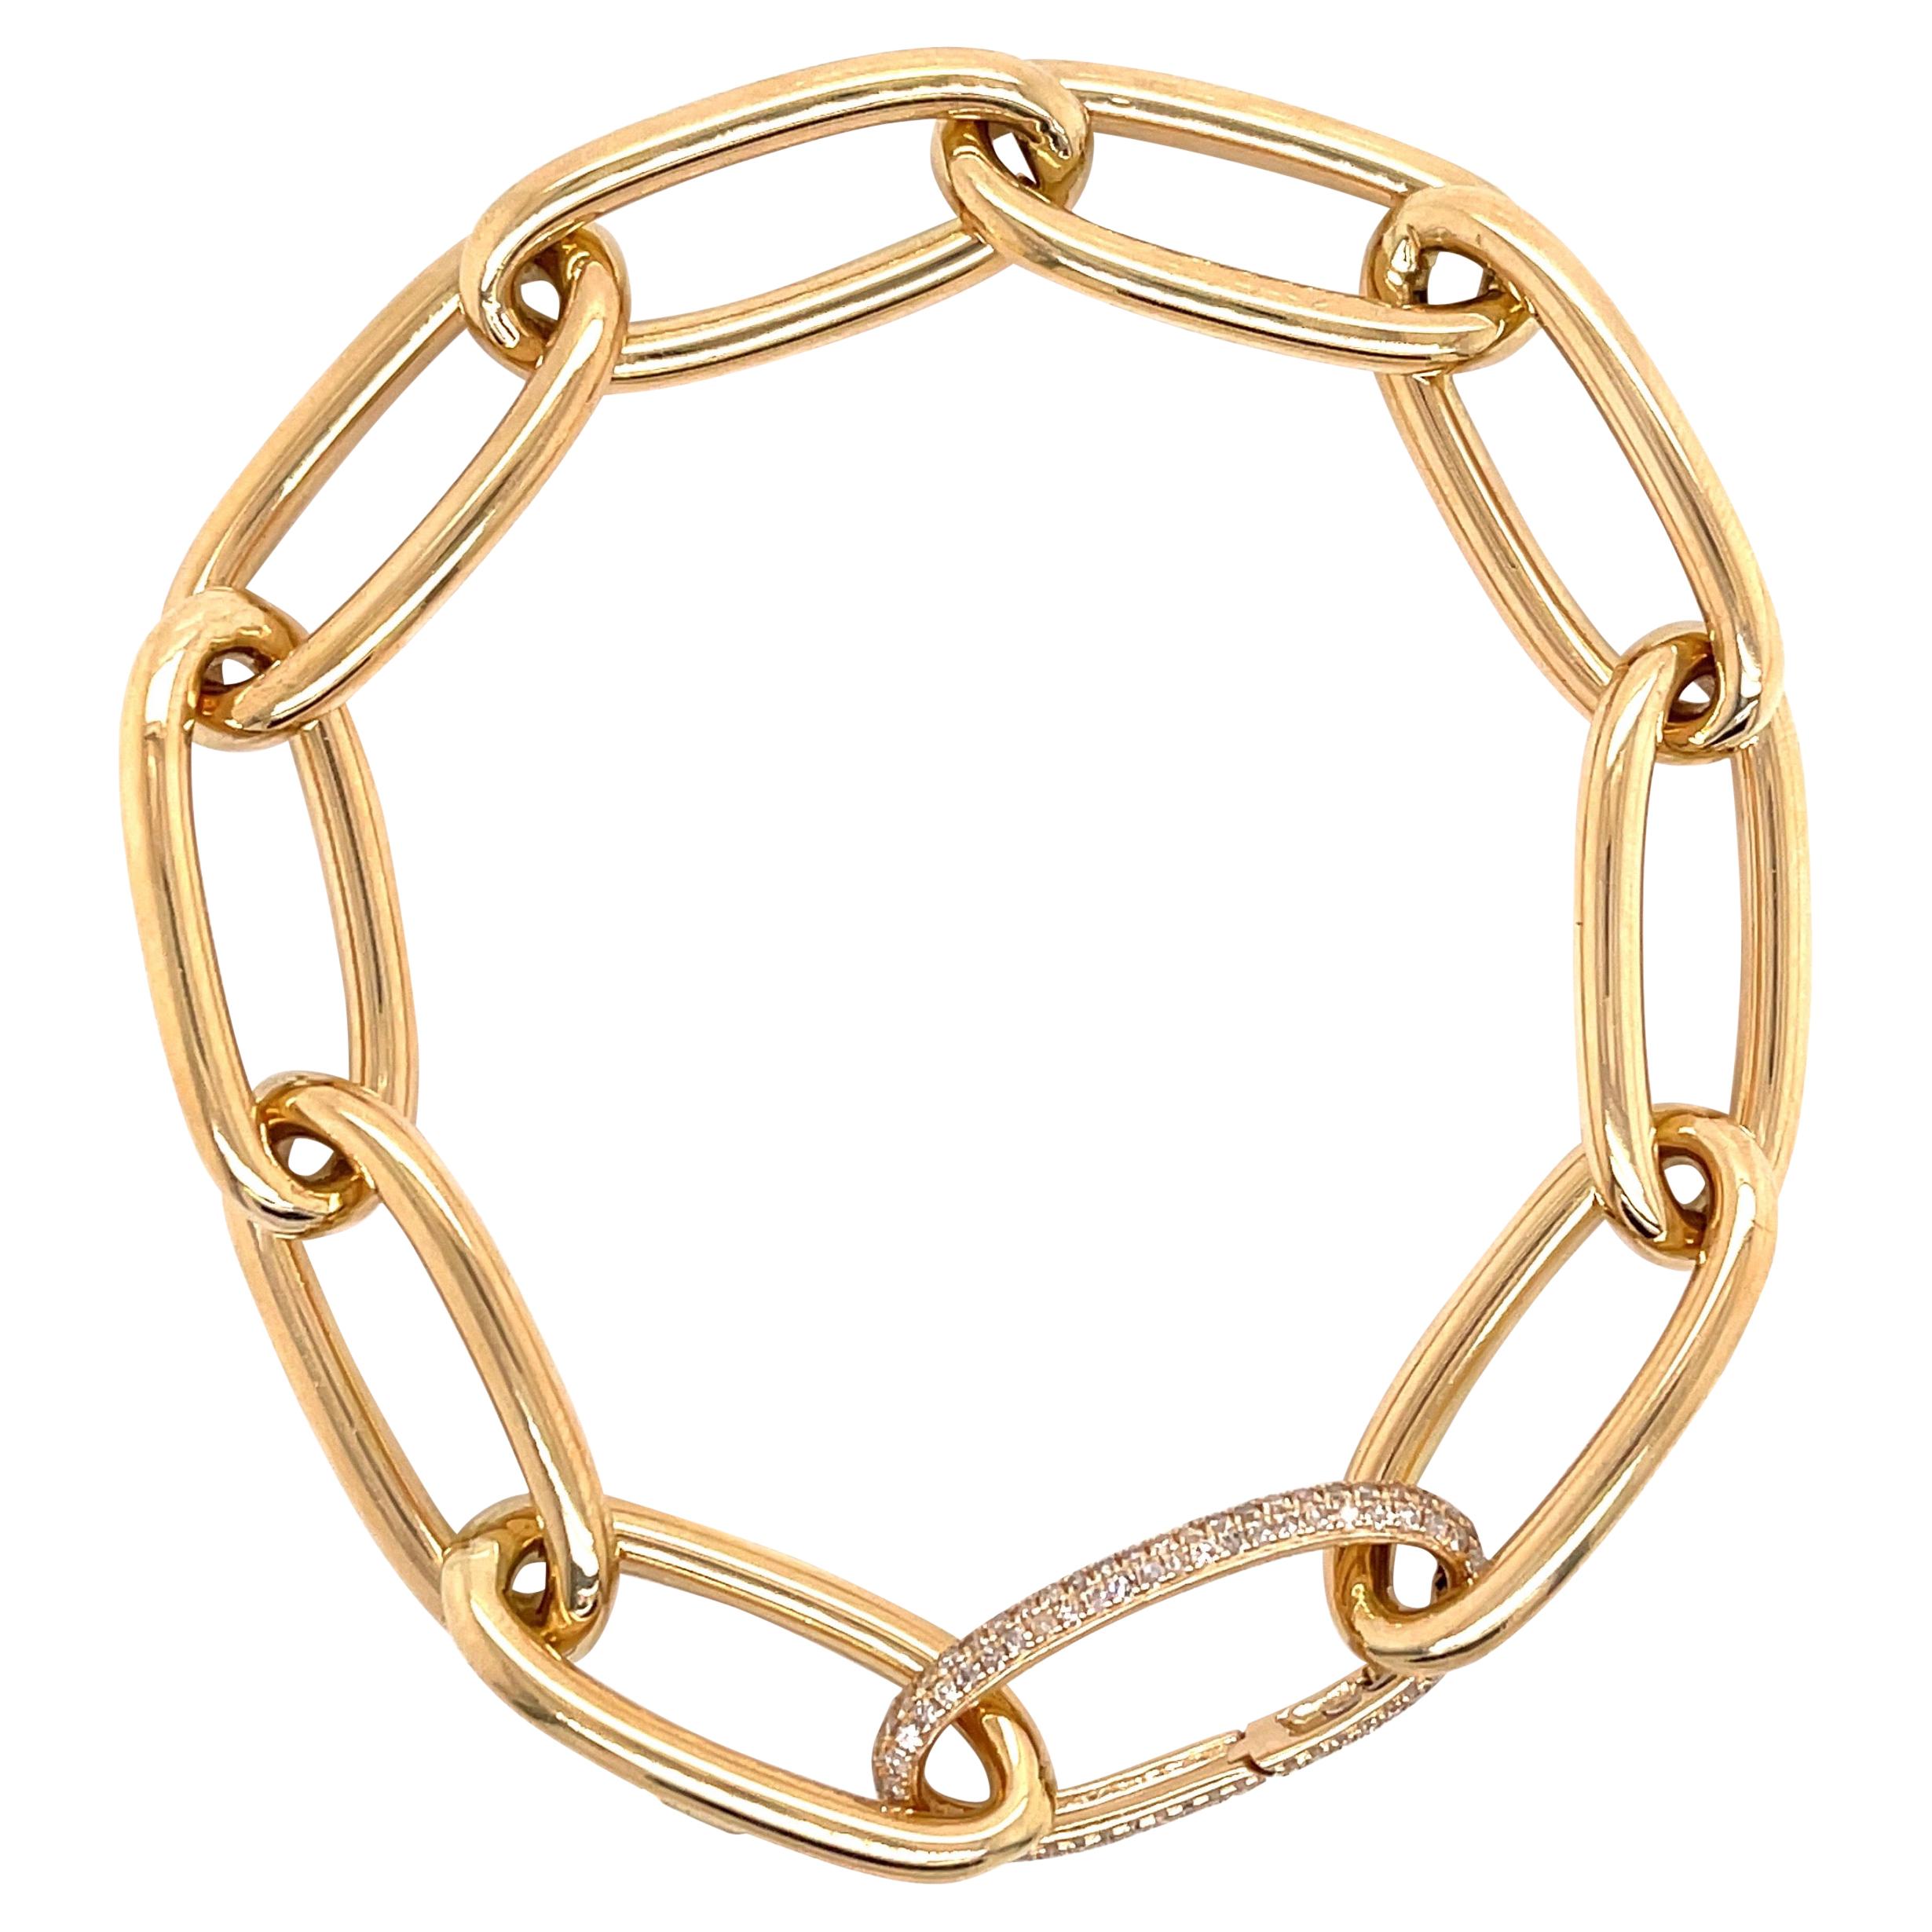 Oval Gold Link Chain Bracelet with Diamond Link 